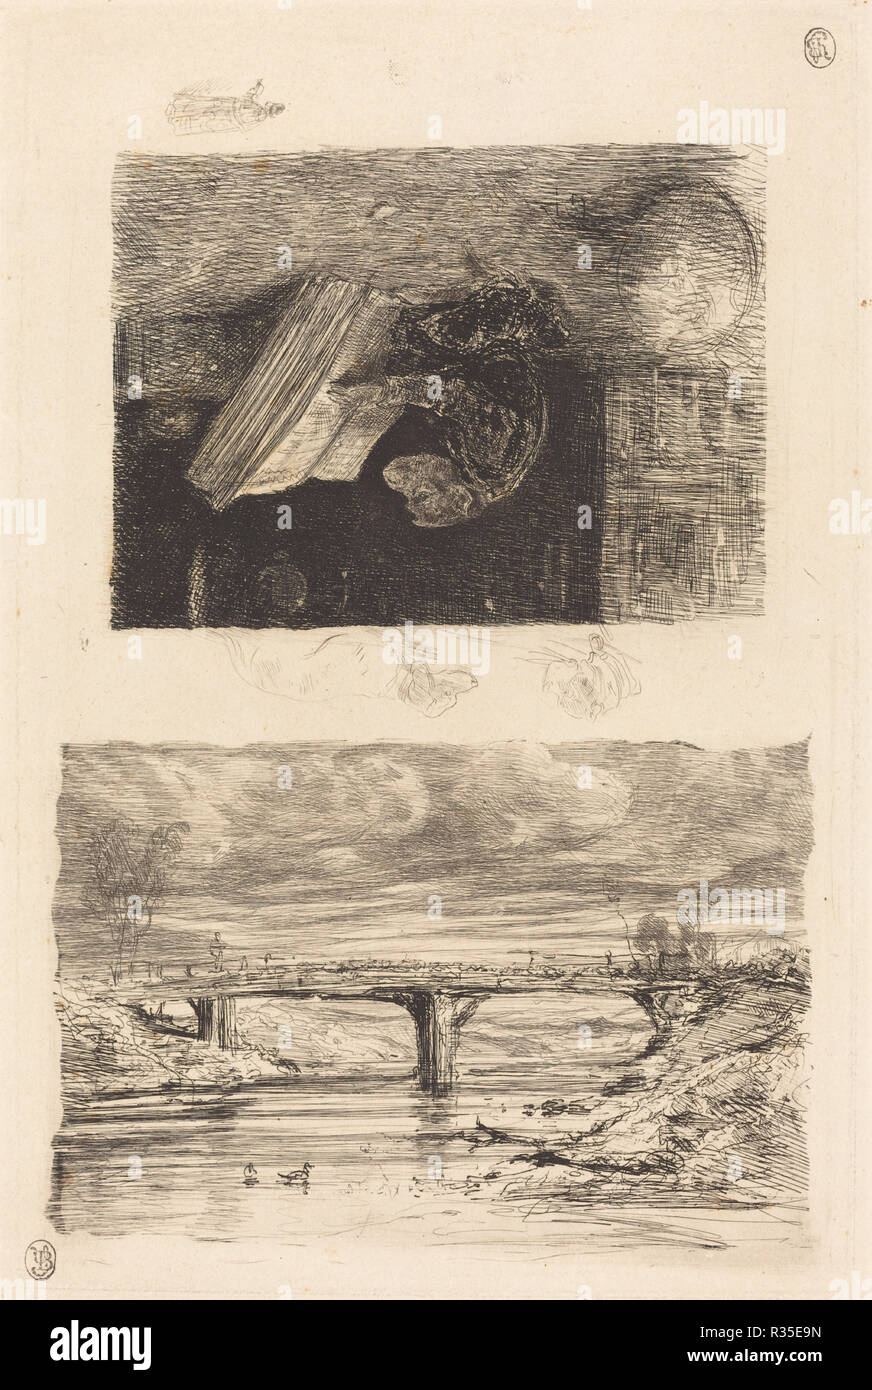 River Landscape with a Bridge; Monkey Paging through a Book. Dated: 1830/1835. Dimensions: plate: 26.3 x 17.1 cm (10 3/8 x 6 3/4 in.)  sheet: 29.7 x 21.1 cm (11 11/16 x 8 5/16 in.). Medium: etching on wove paper (2 subjects on one plate with remarques, proof). Museum: National Gallery of Art, Washington DC. Author: Decamps, Alexandre-Gabriel. Stock Photo